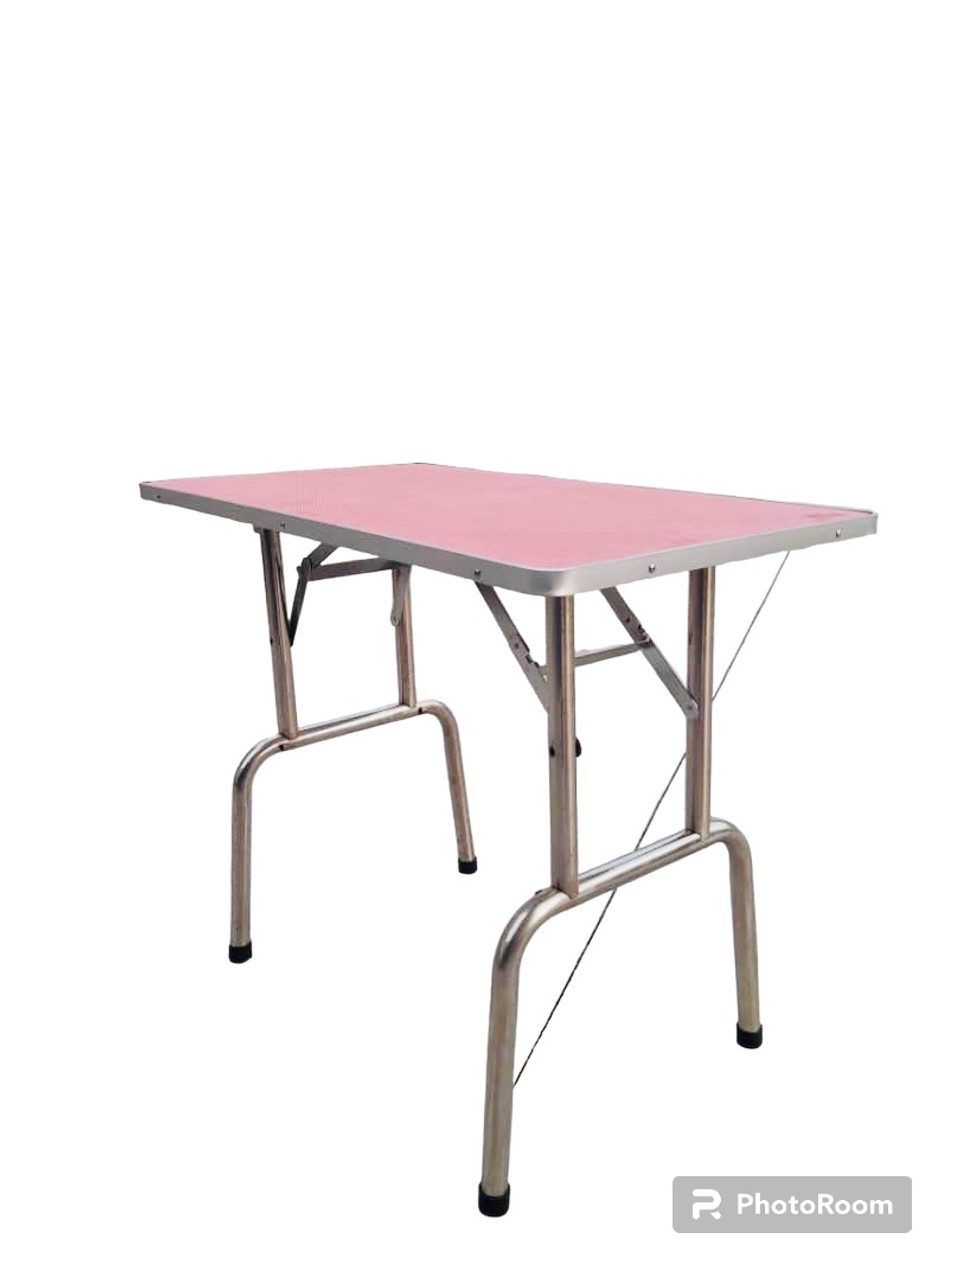 Foldable Grooming Table